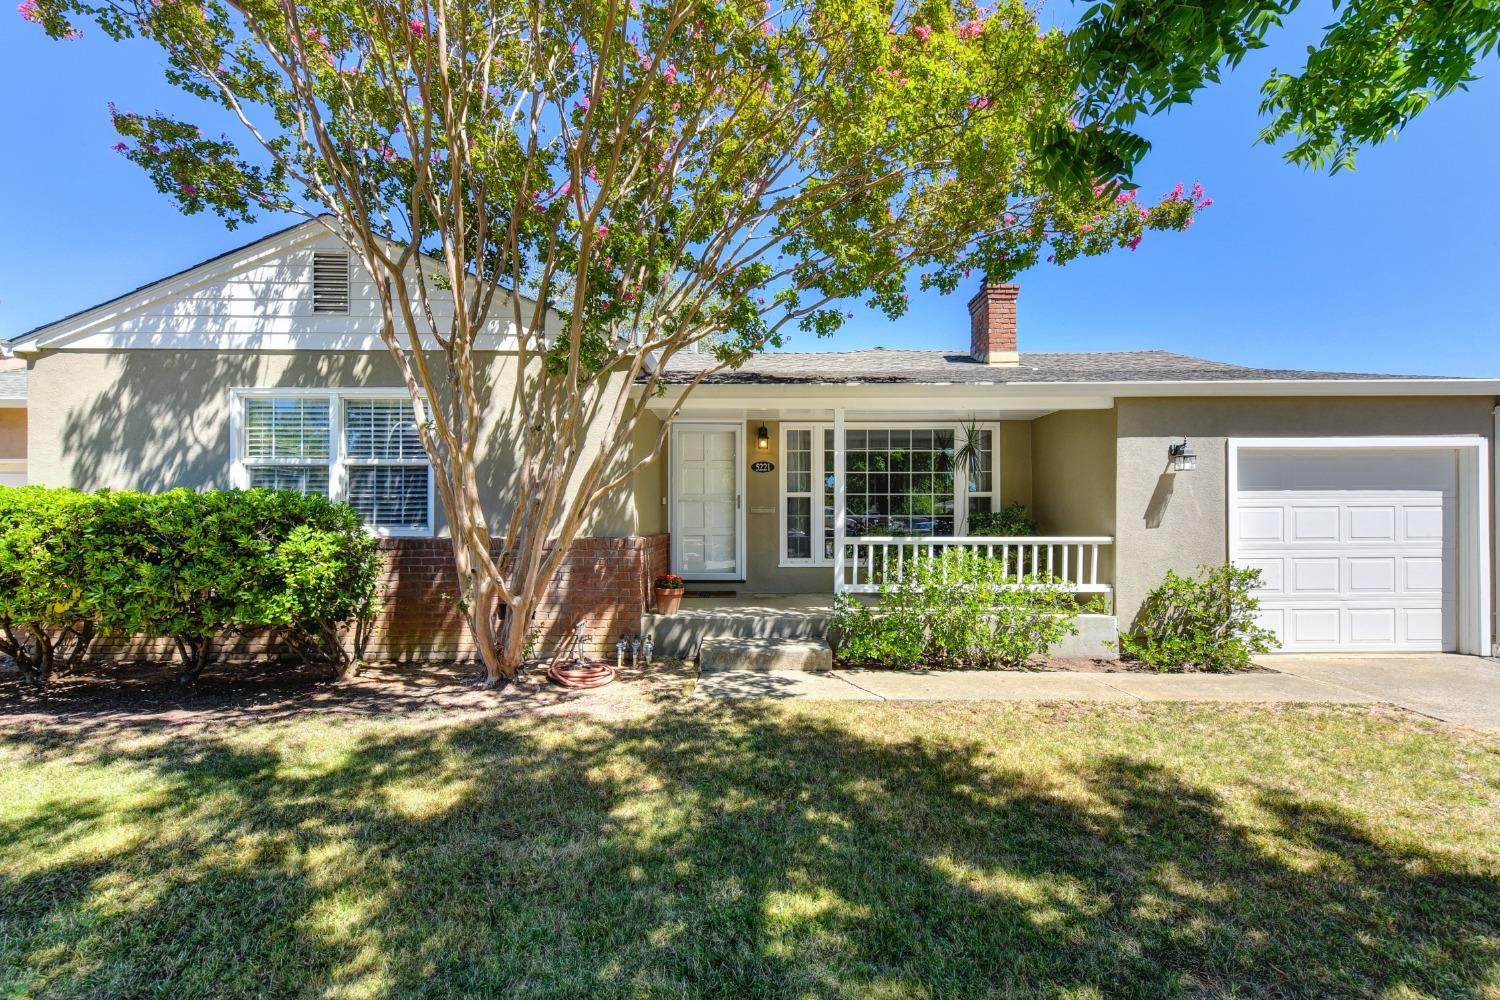 Welcome to 5221 Rosita Way in beautiful Hollywood Park! This wonderful 2 bedroom, 2 full bath home i